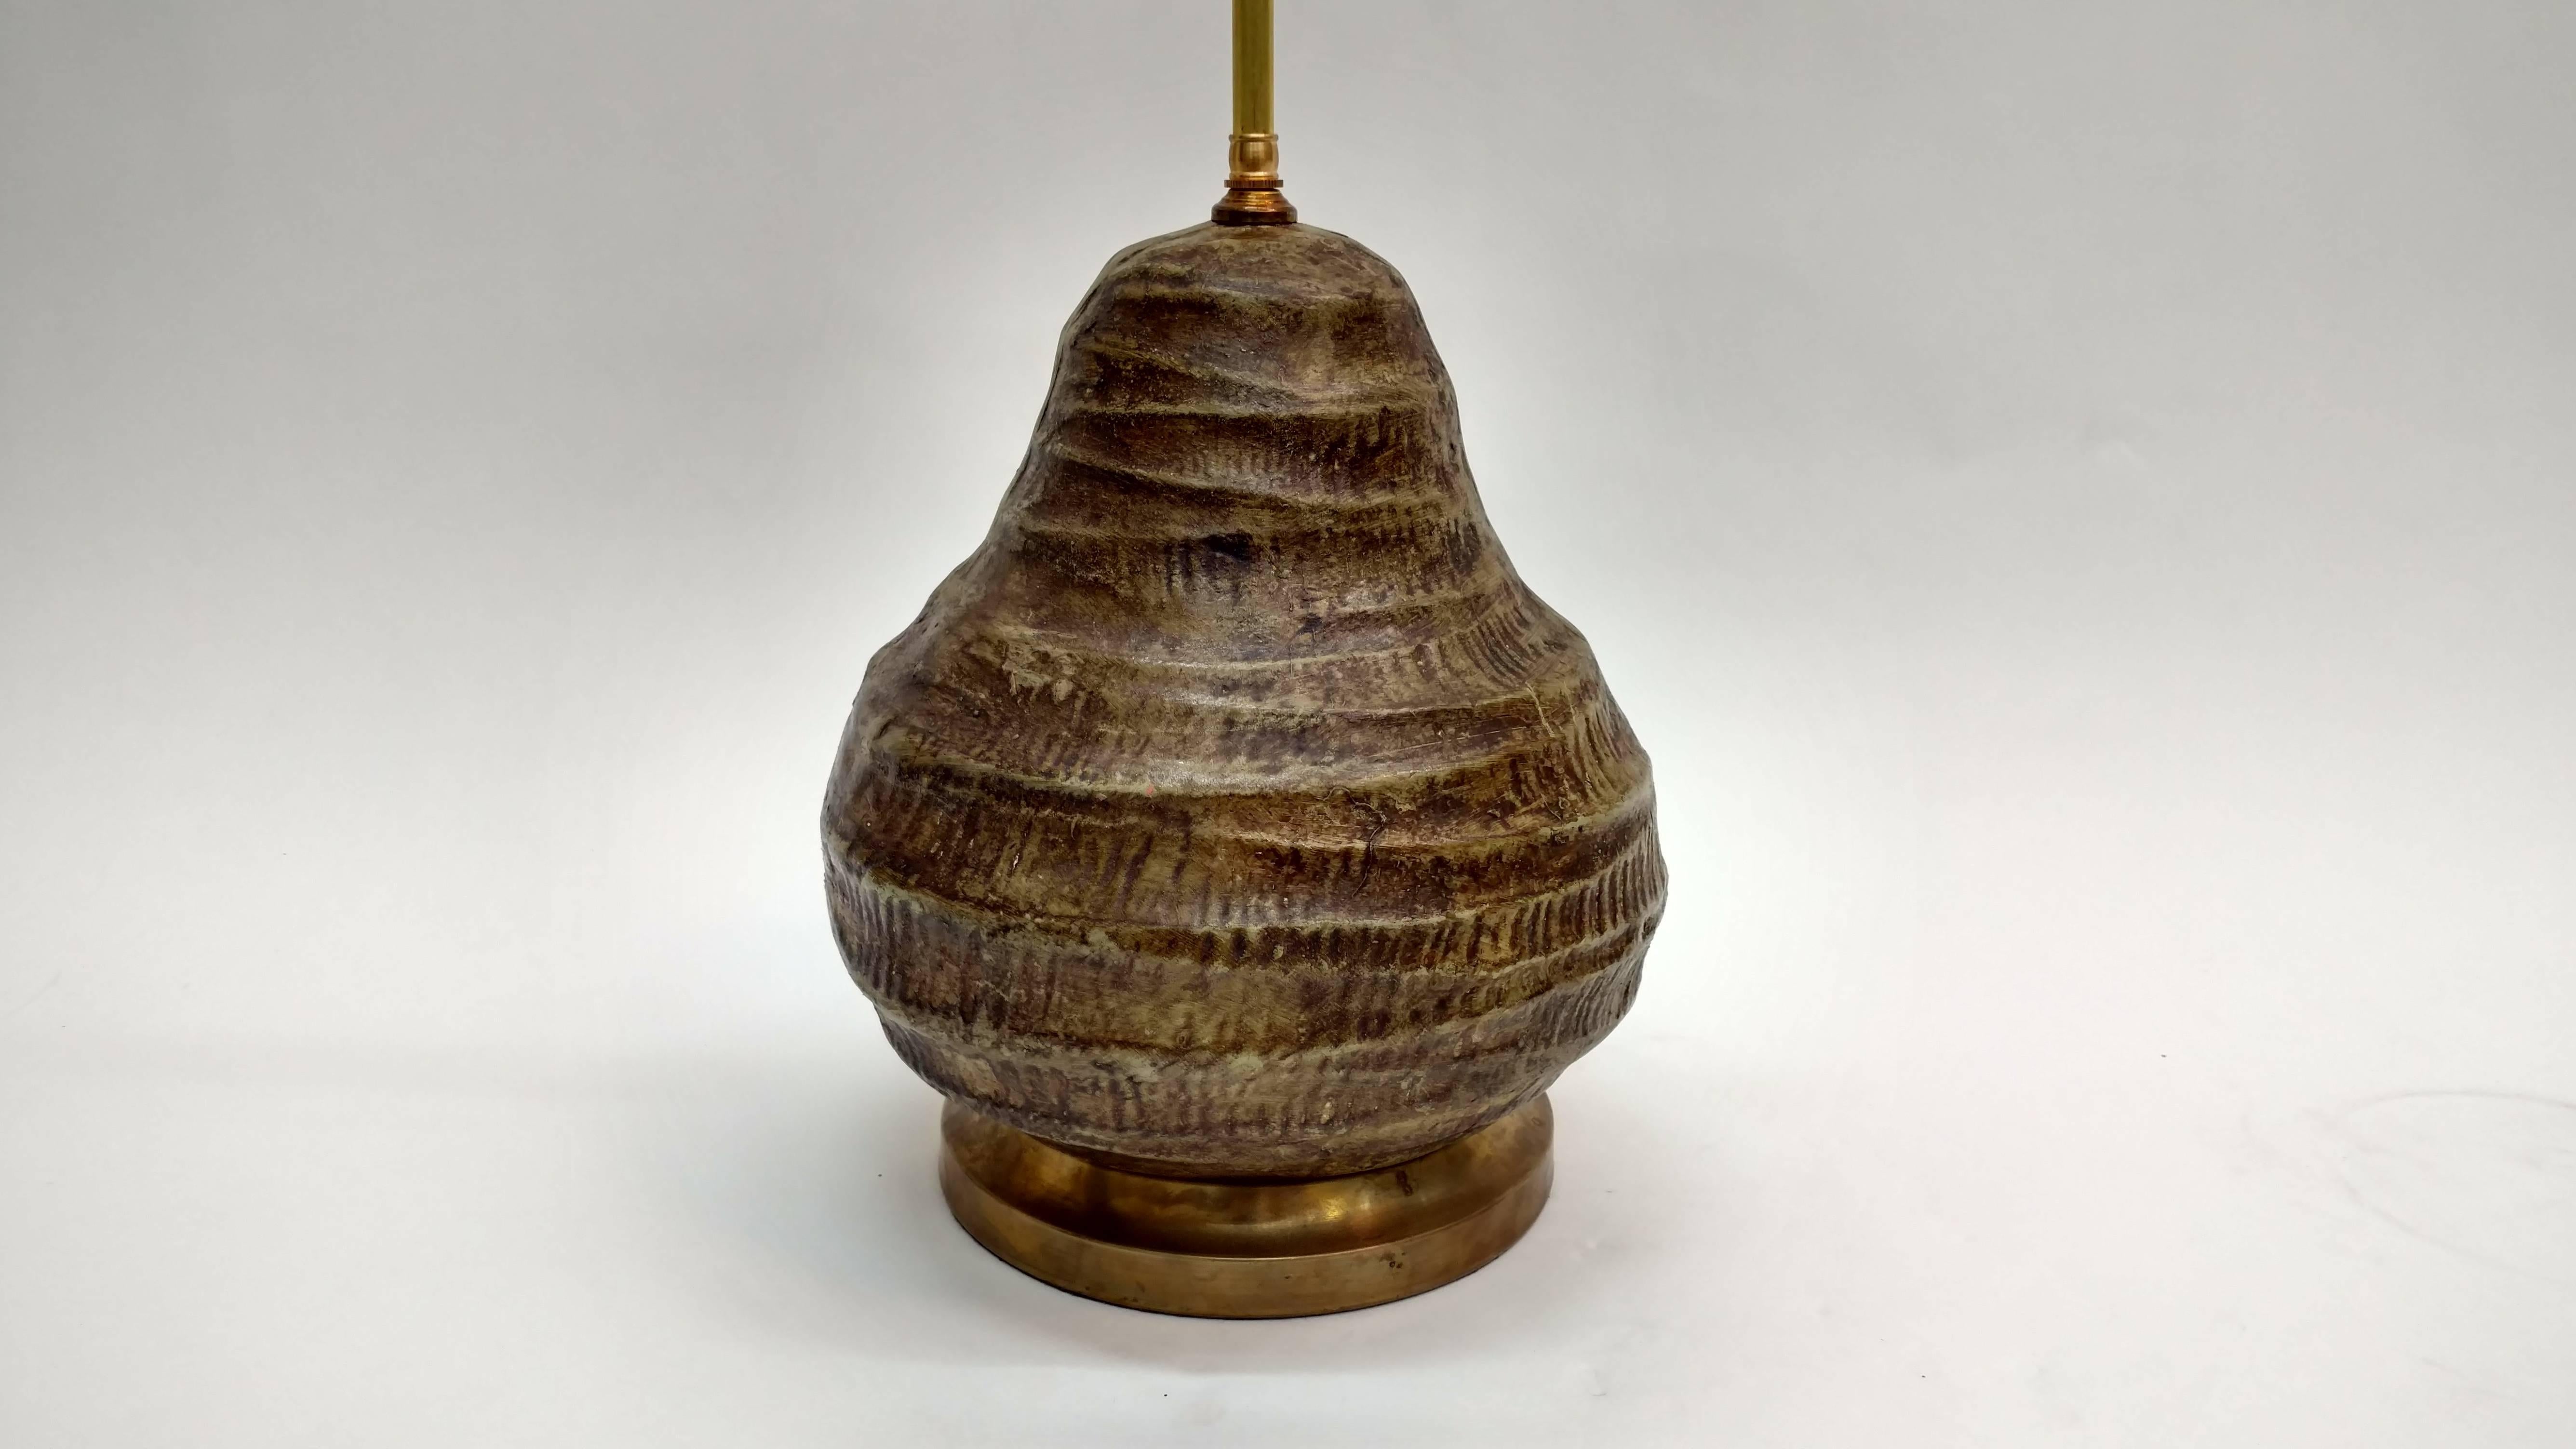 Pottery lamp resembling a pear.
Rewired with double pull chain sockets and brass base.